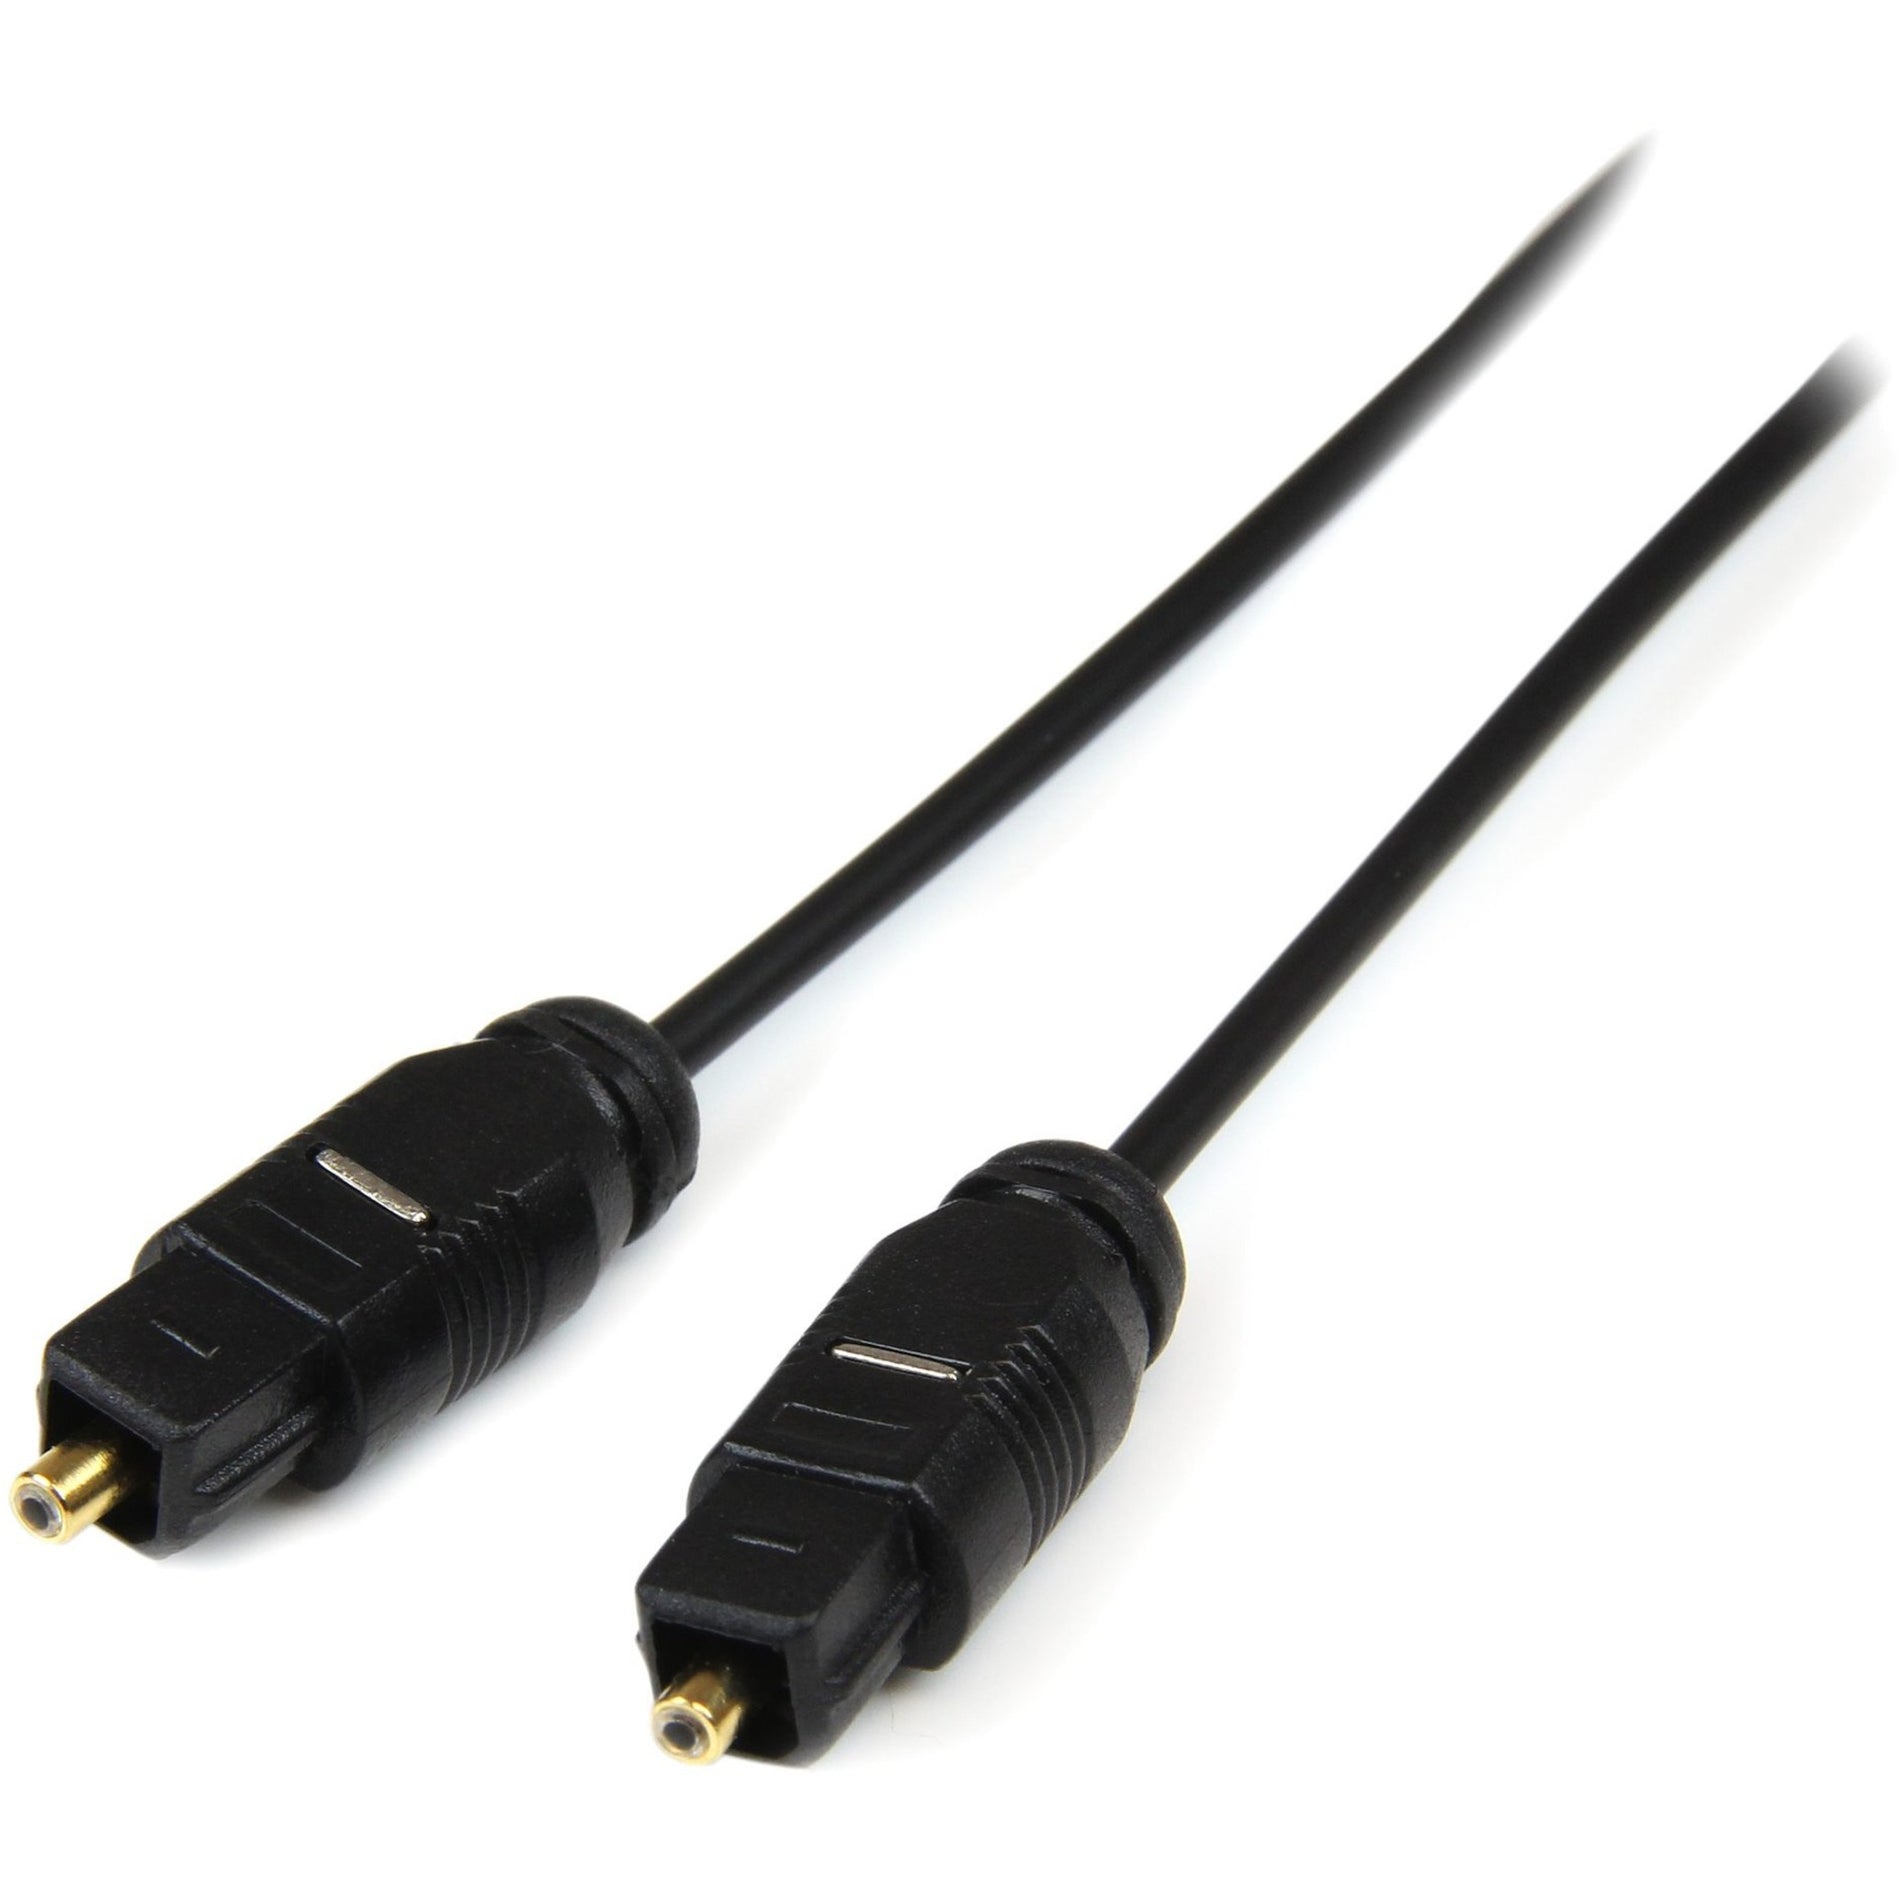 StarTech.com THINTOS10 10ft Toslink Digital SPDIF Audio Cable, Lifetime Warranty, EMI/RF Protection, Ultra-thin